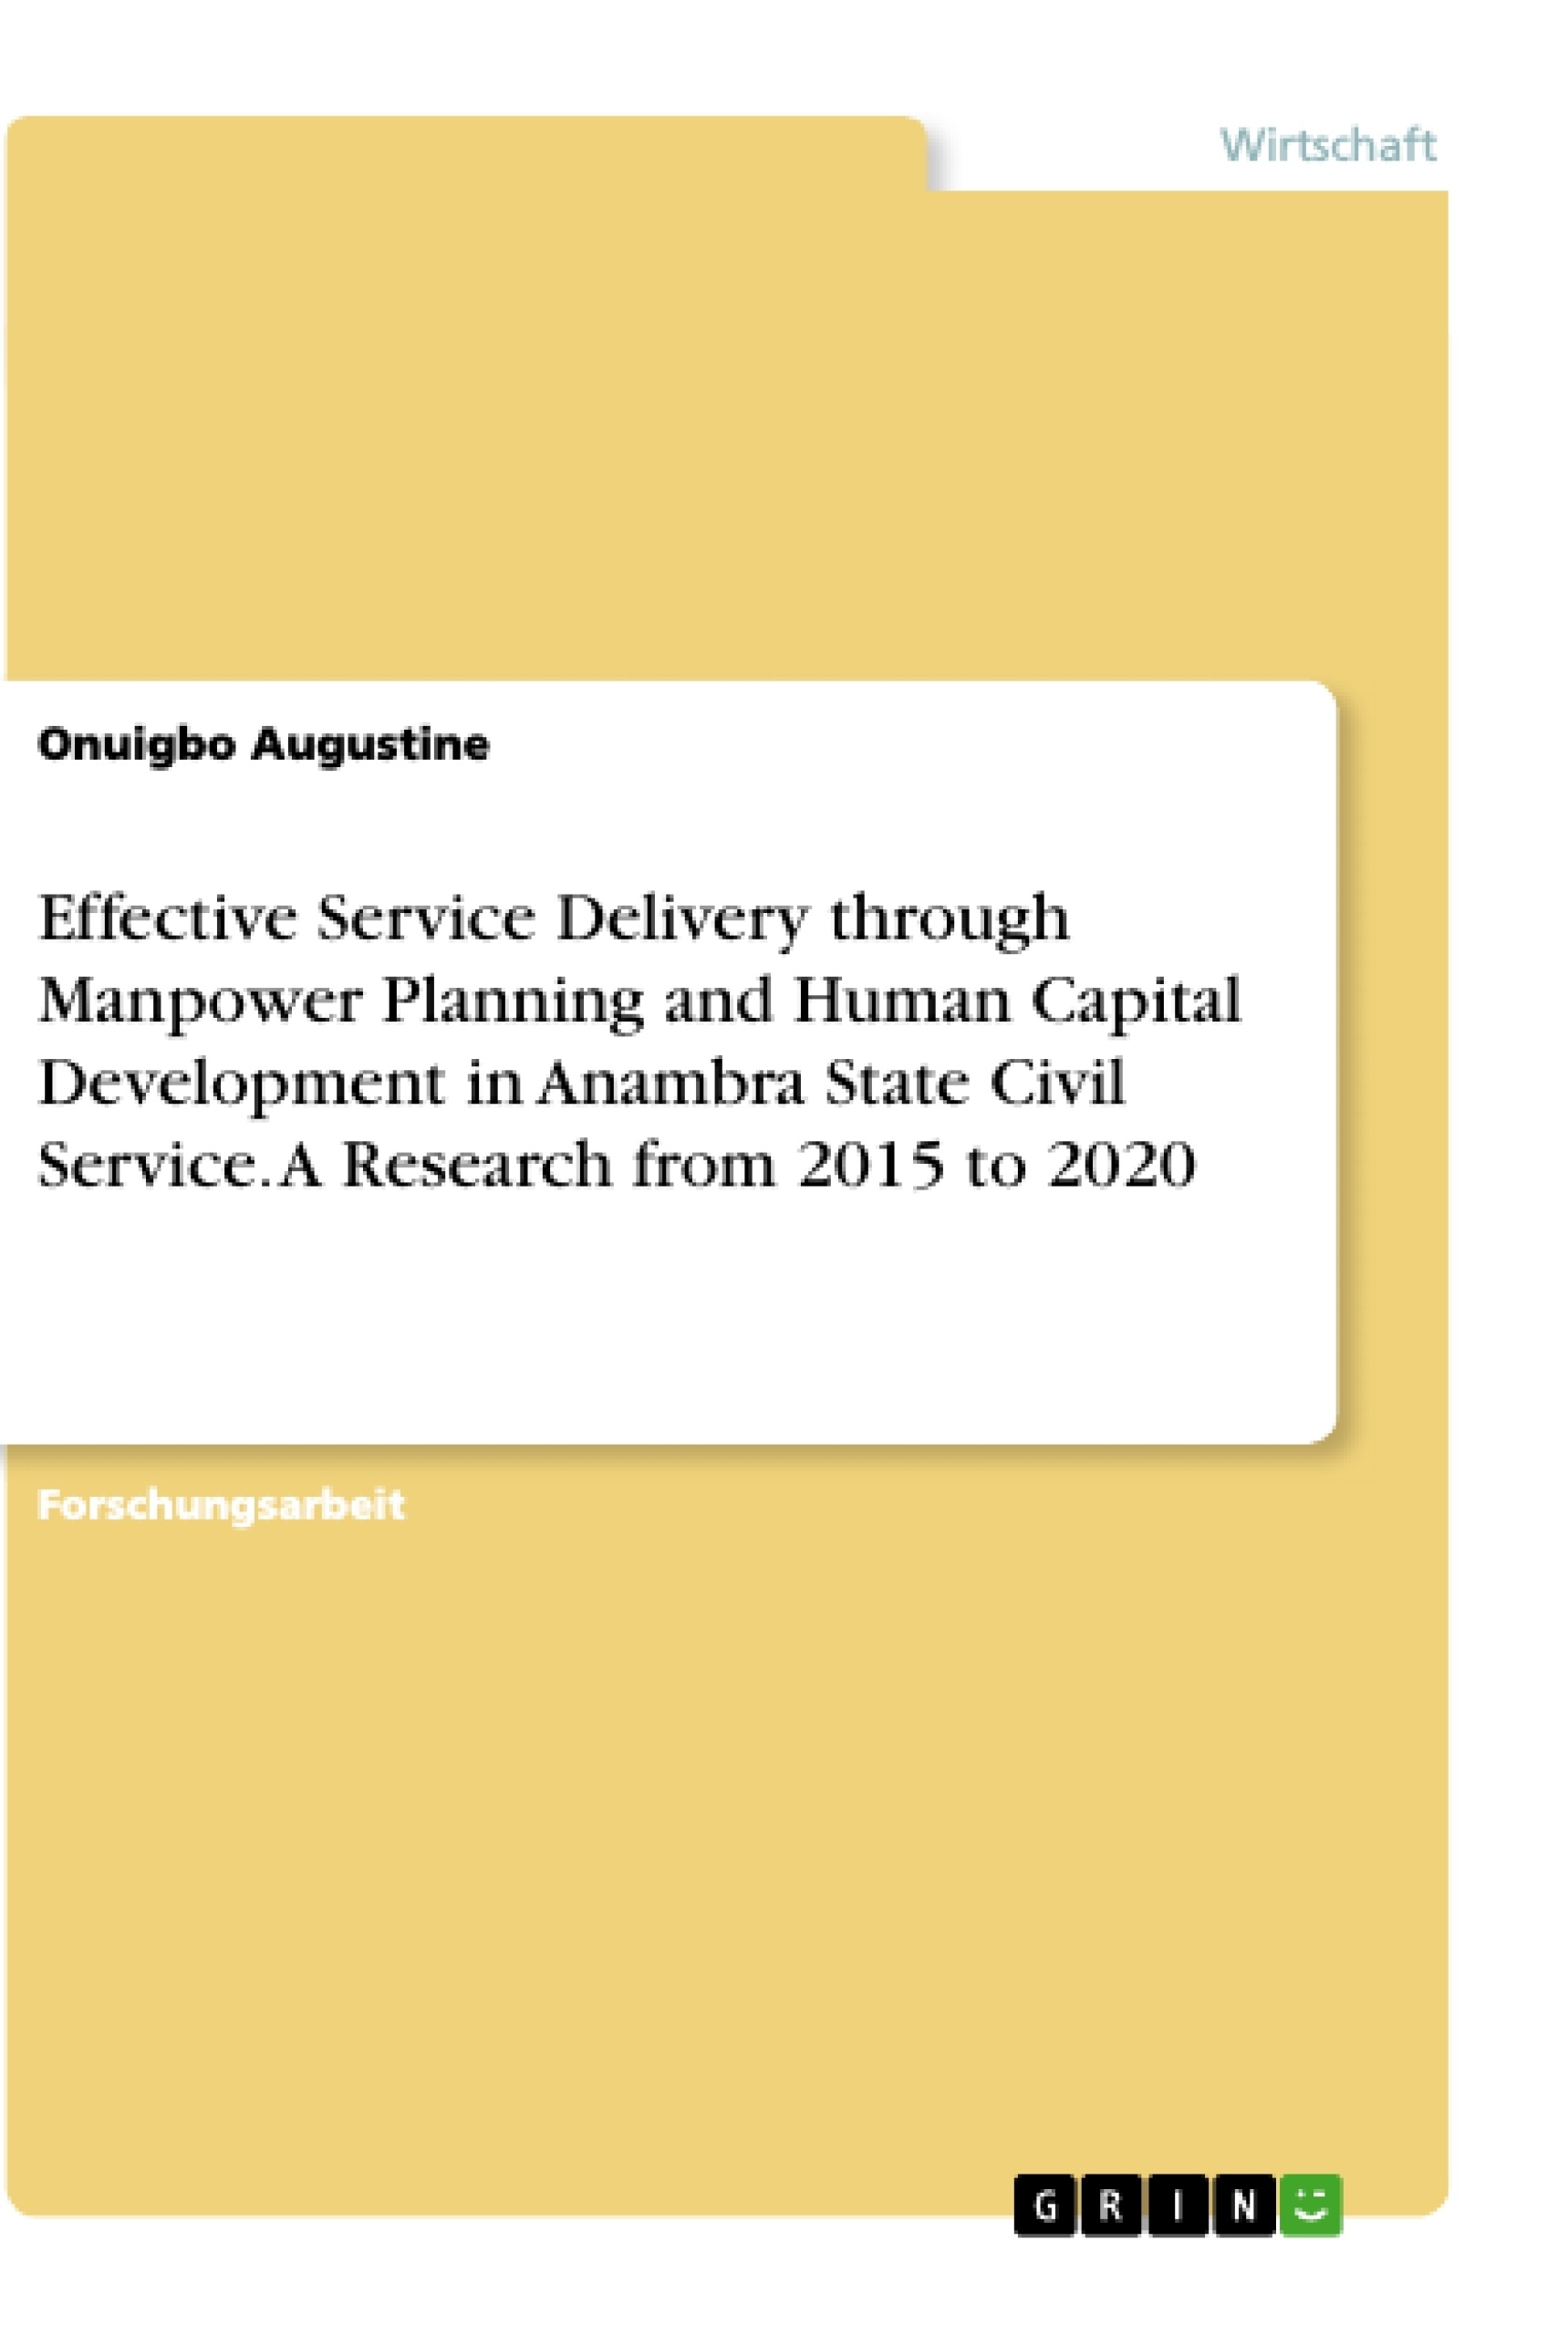 Titel: Effective Service Delivery through Manpower Planning and Human Capital Development in Anambra State Civil Service. A Research from 2015 to 2020